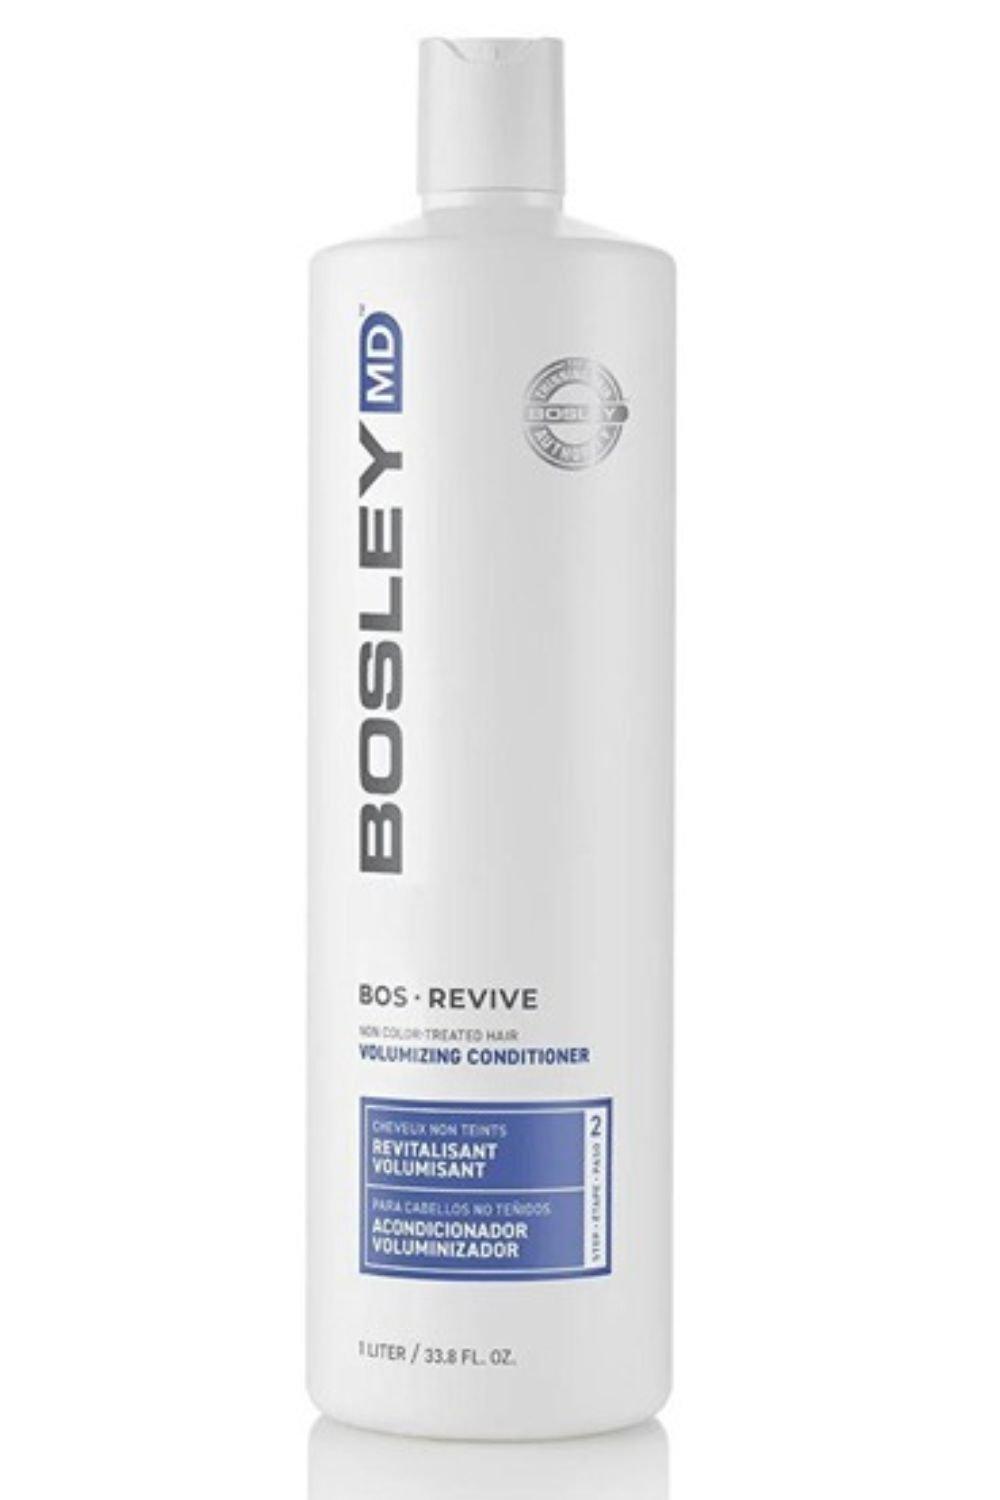 BOSRevive Hair Loss Non Colour-Treated Hair Volumising Conditioner